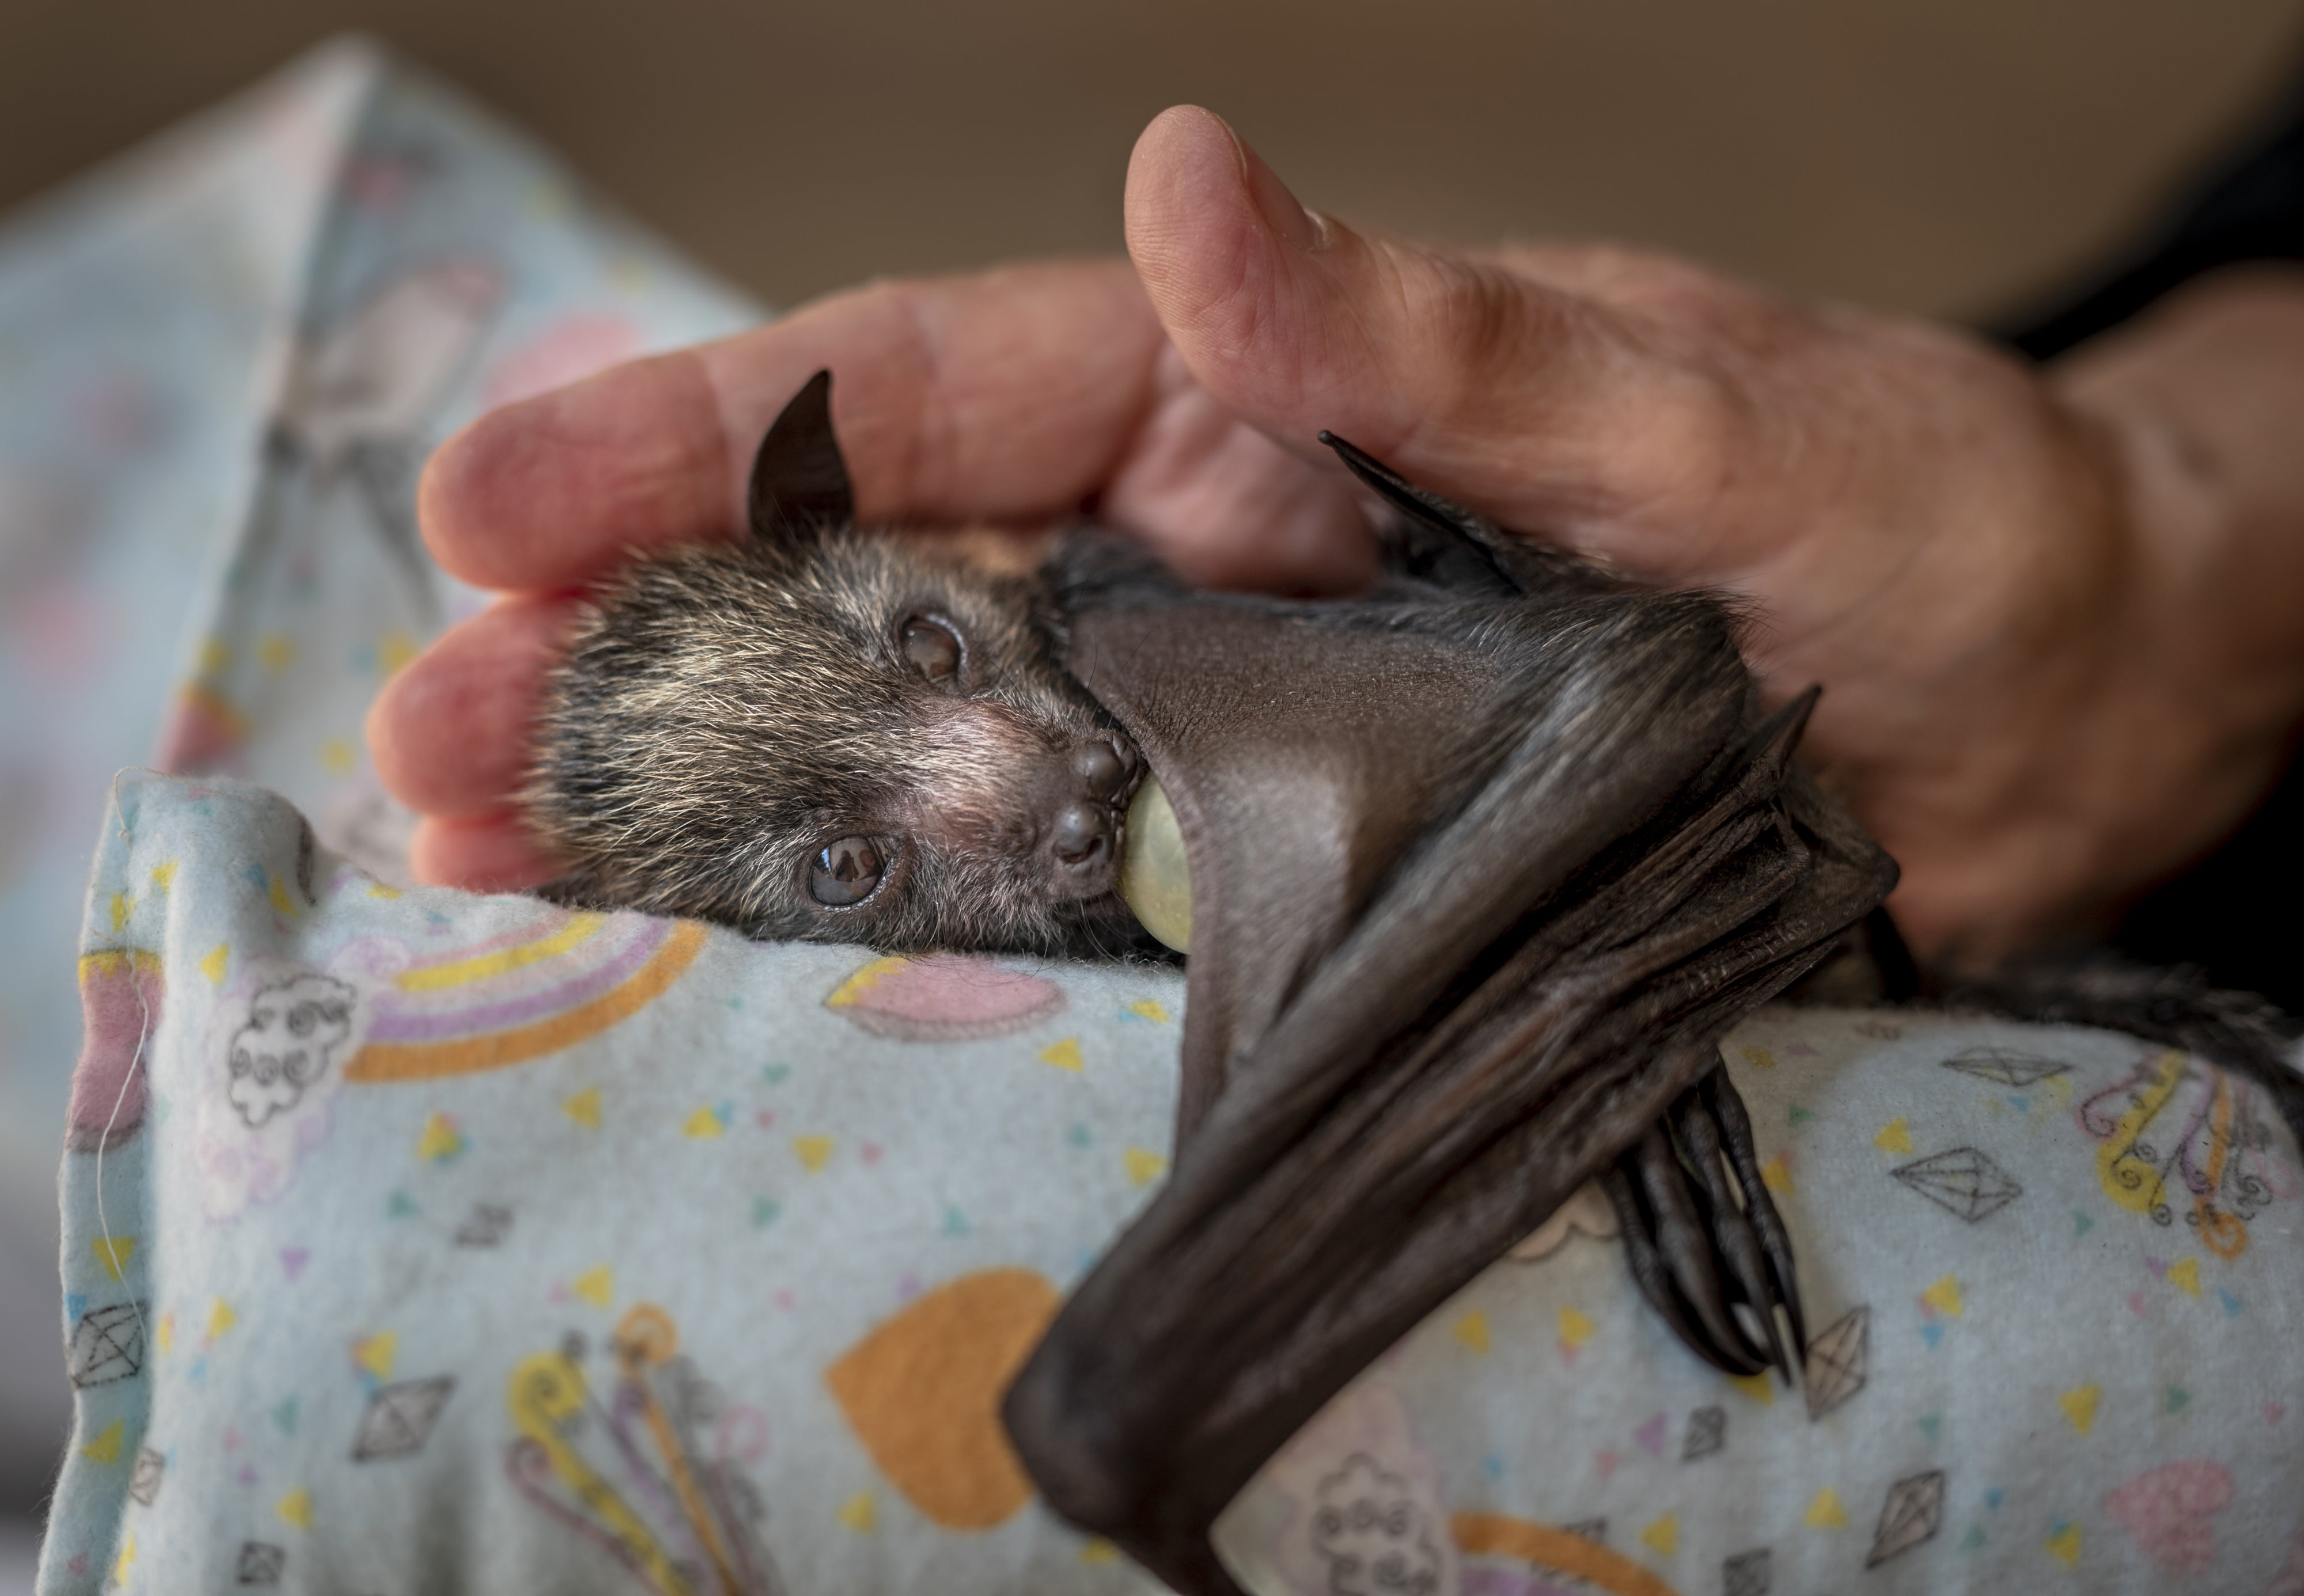 A caring hand by Douglas Gimsey (Douglas Gimesy/Wildlife Photographer of the Year)